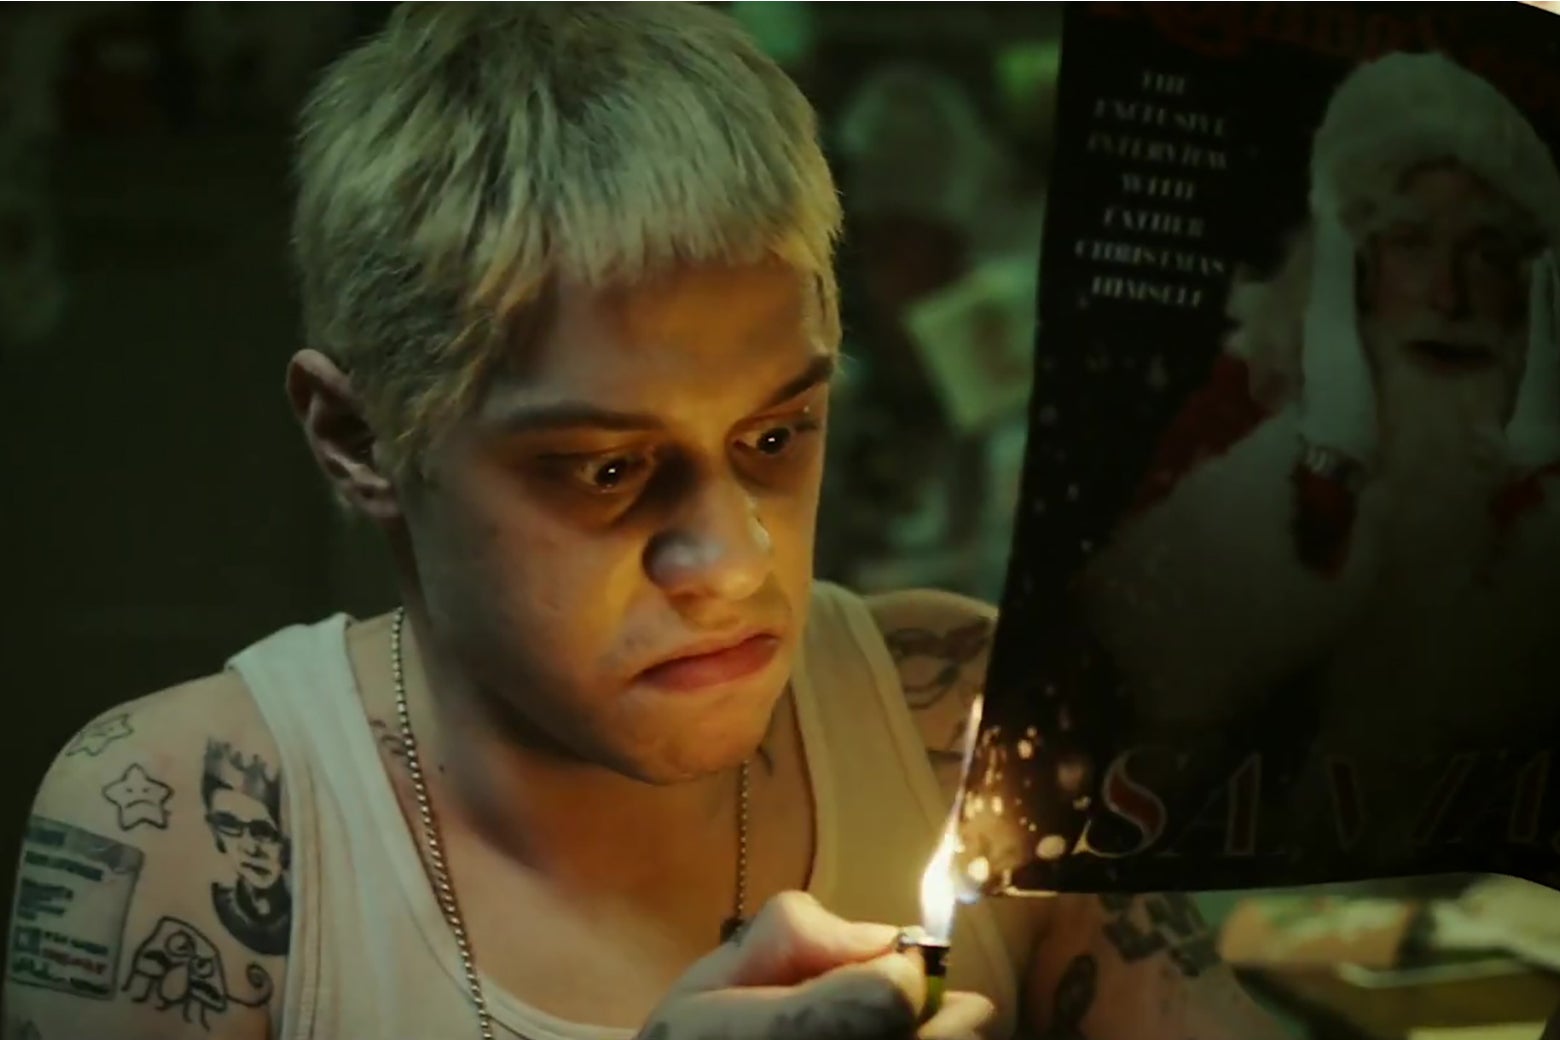 Pete Davidson, with his hair died blonde like Eminem, sets a photograph of Santa Claus on fire.